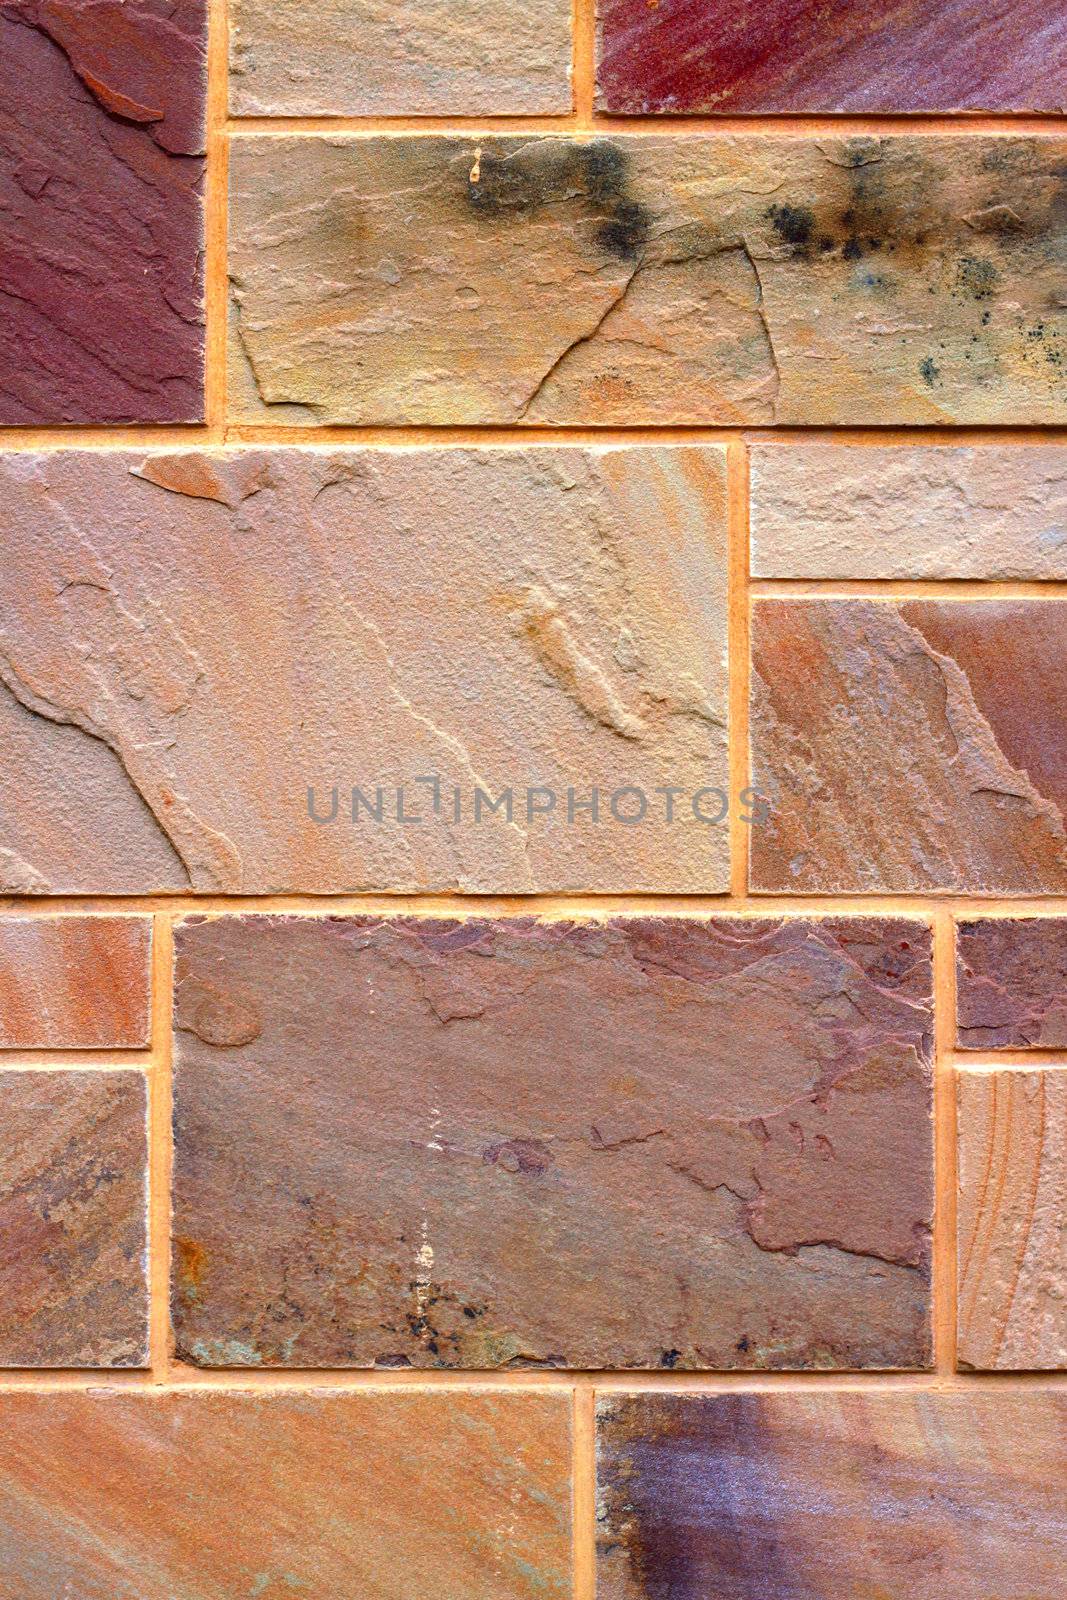 Background Texture of a Modern Architectural Imitation Stone Wall Panel